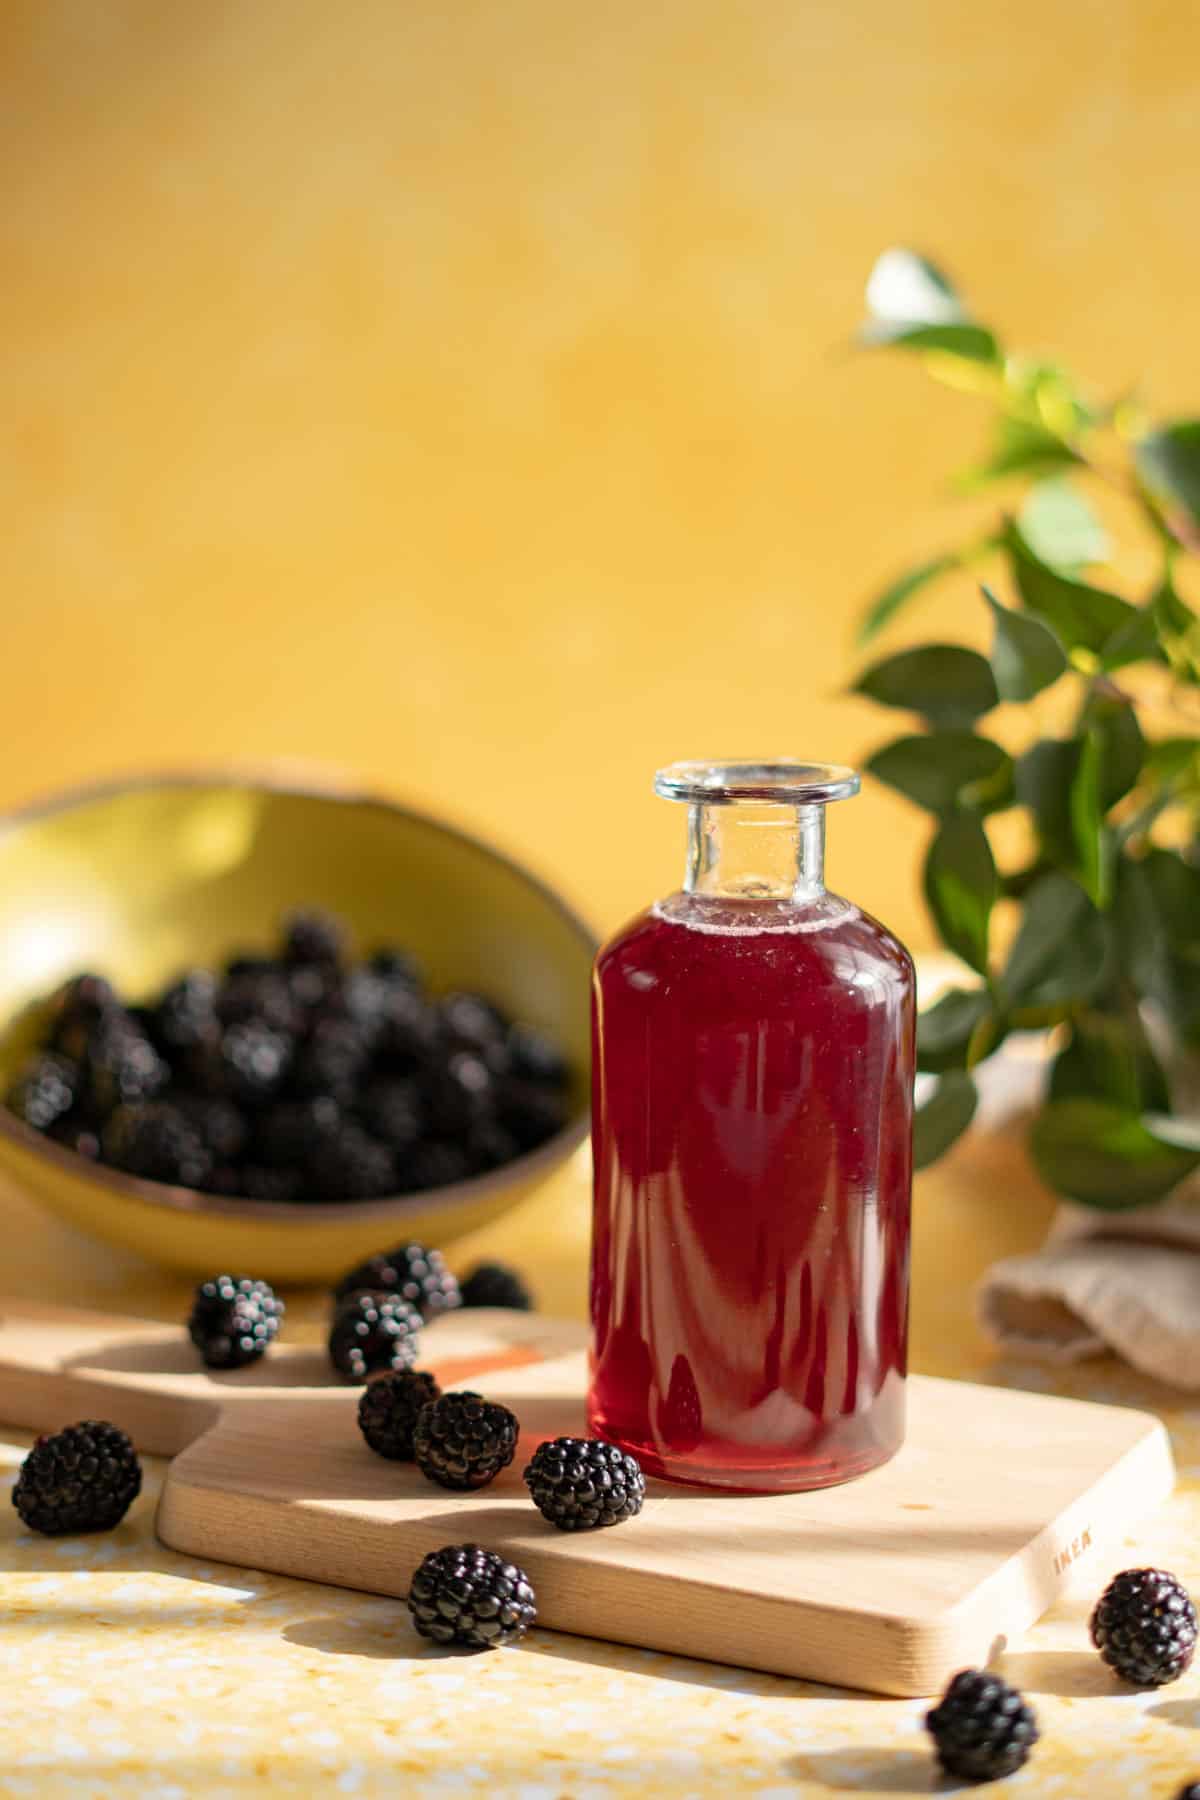 A bottle of blackberry syrup is on a small cutting board with a bowl of blackberries in the background. There are blackberries scattered on the countertop.